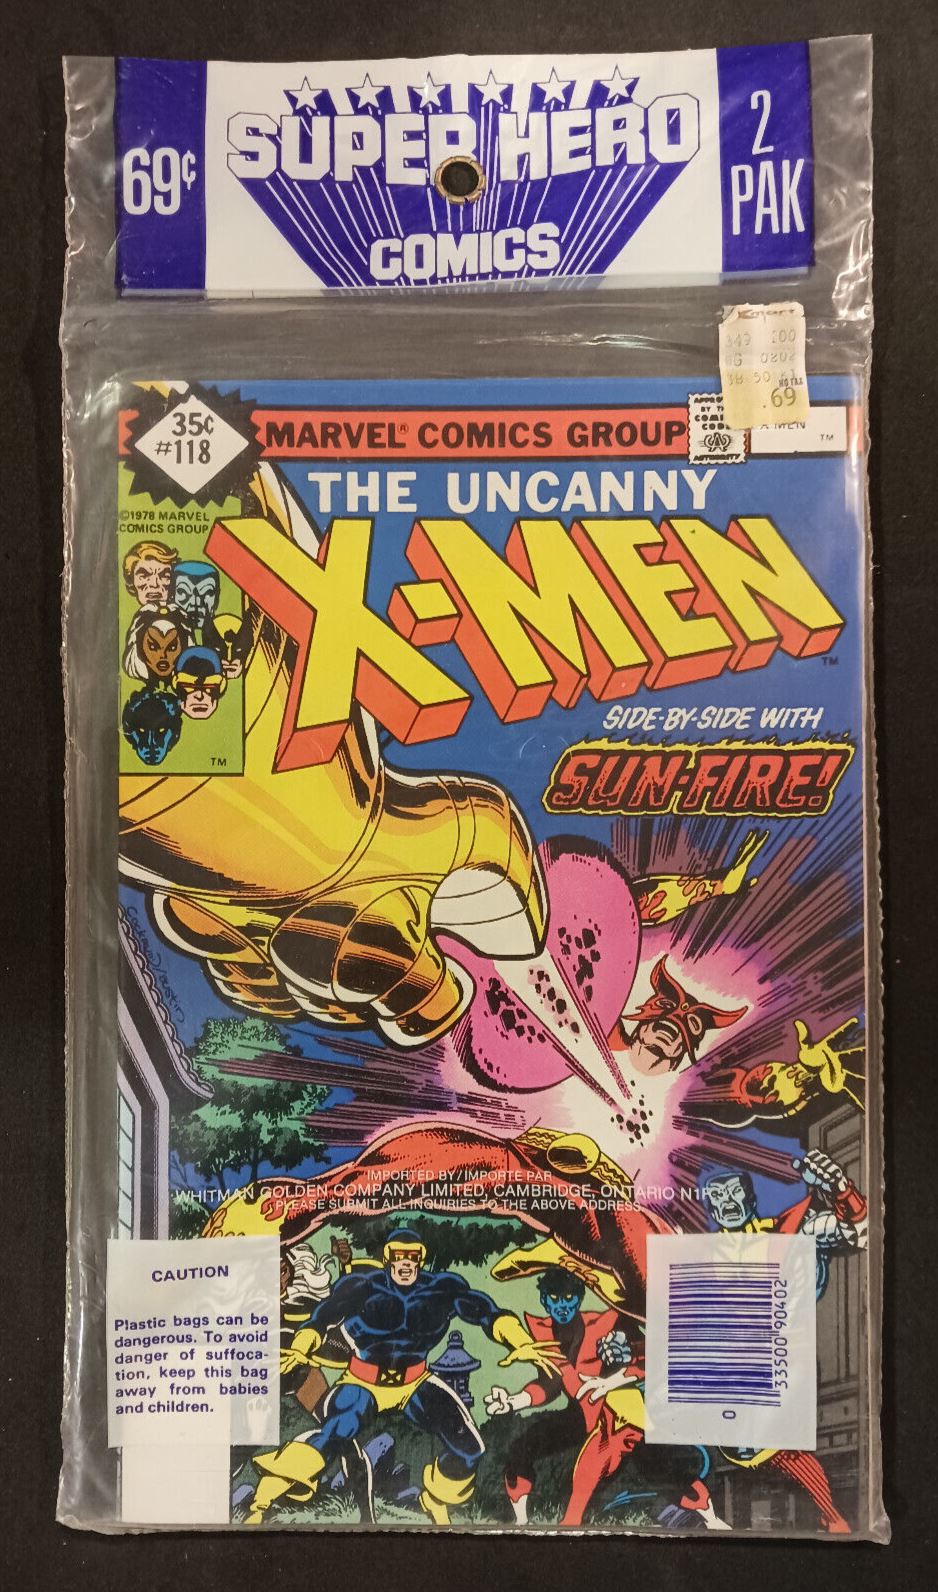 1978 Marvel Comics The Uncanny X-Men #118 and The Human Fly #18 Sealed Unopened